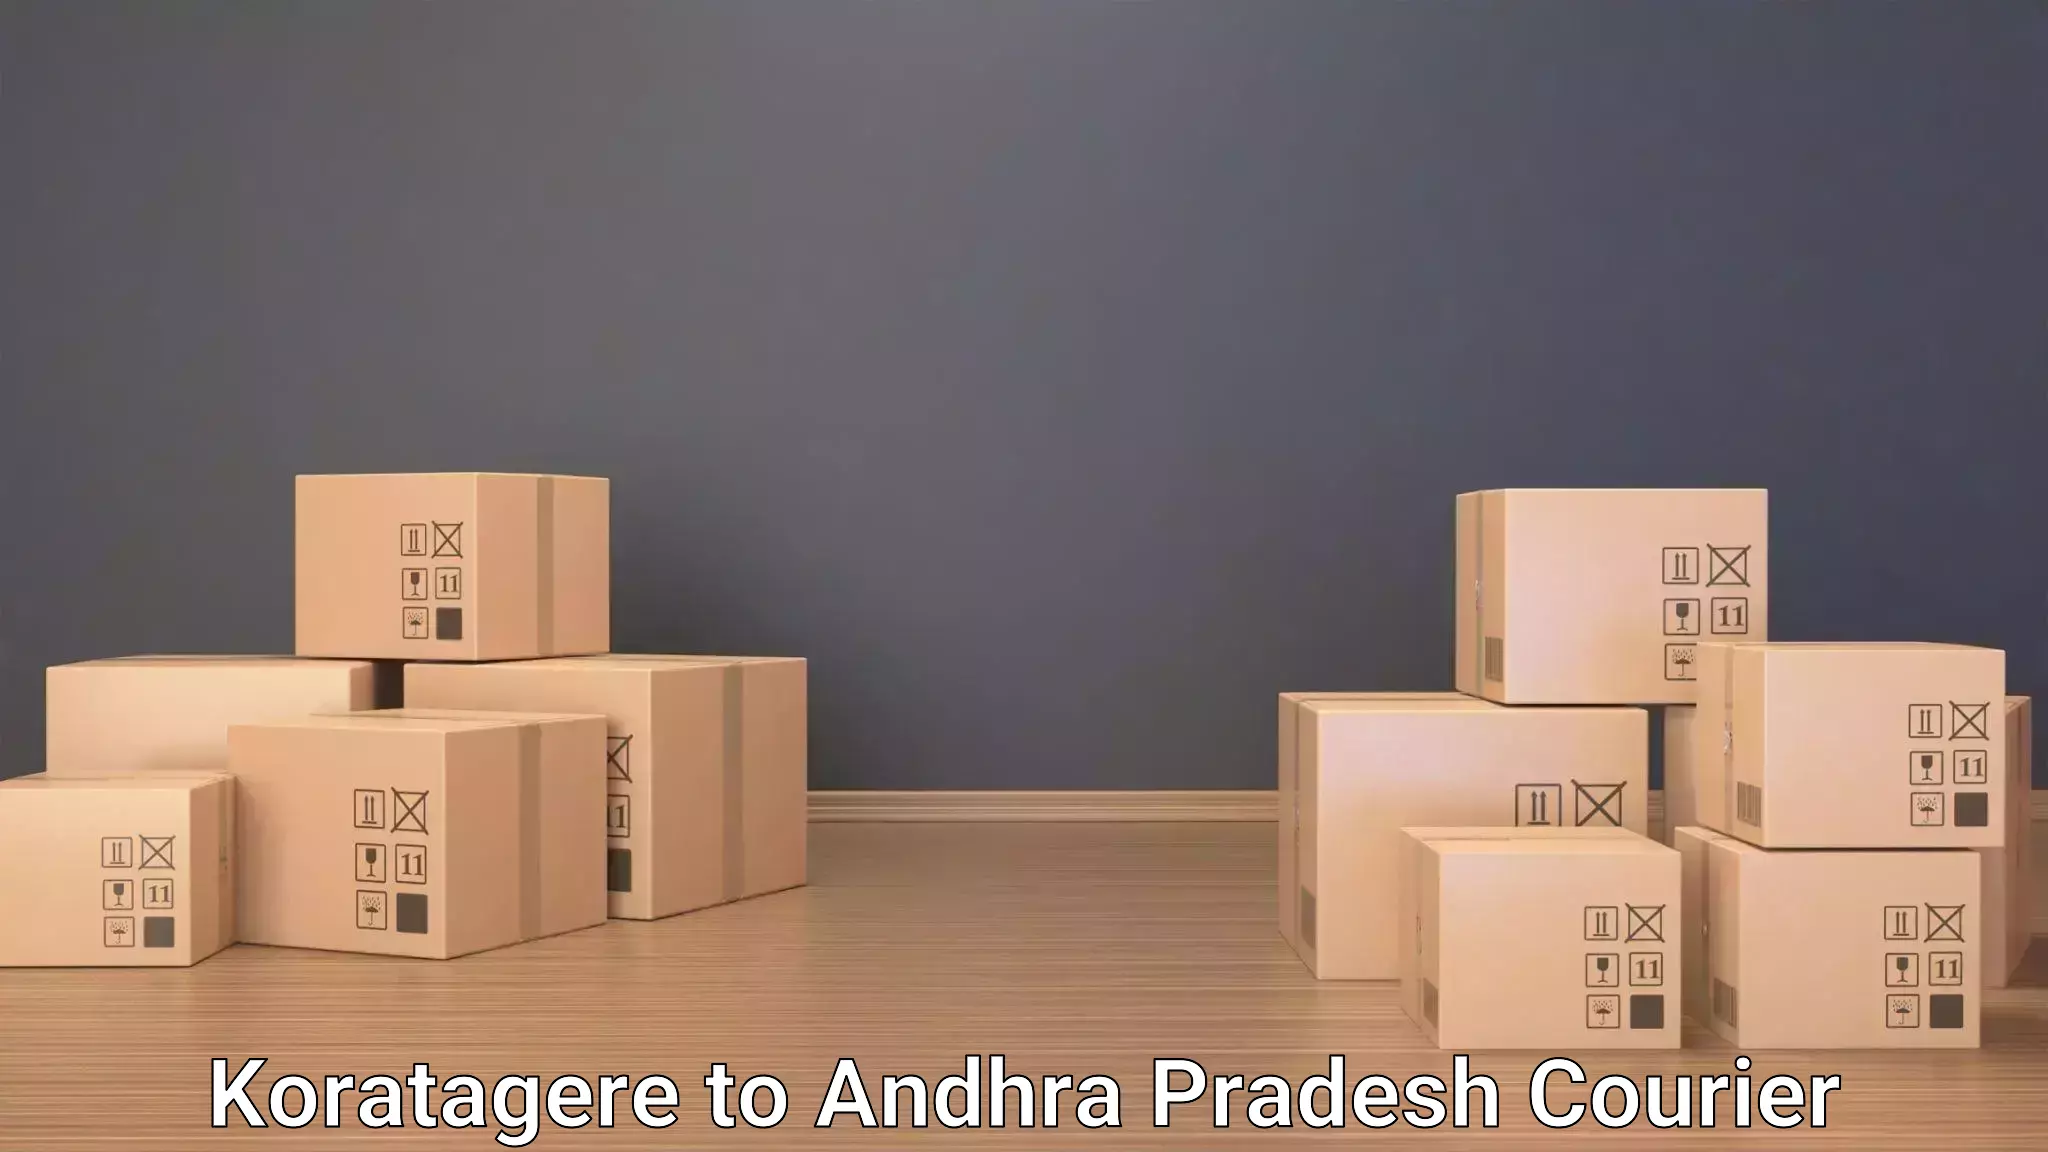 Luggage storage and delivery Koratagere to Gopalapatnam